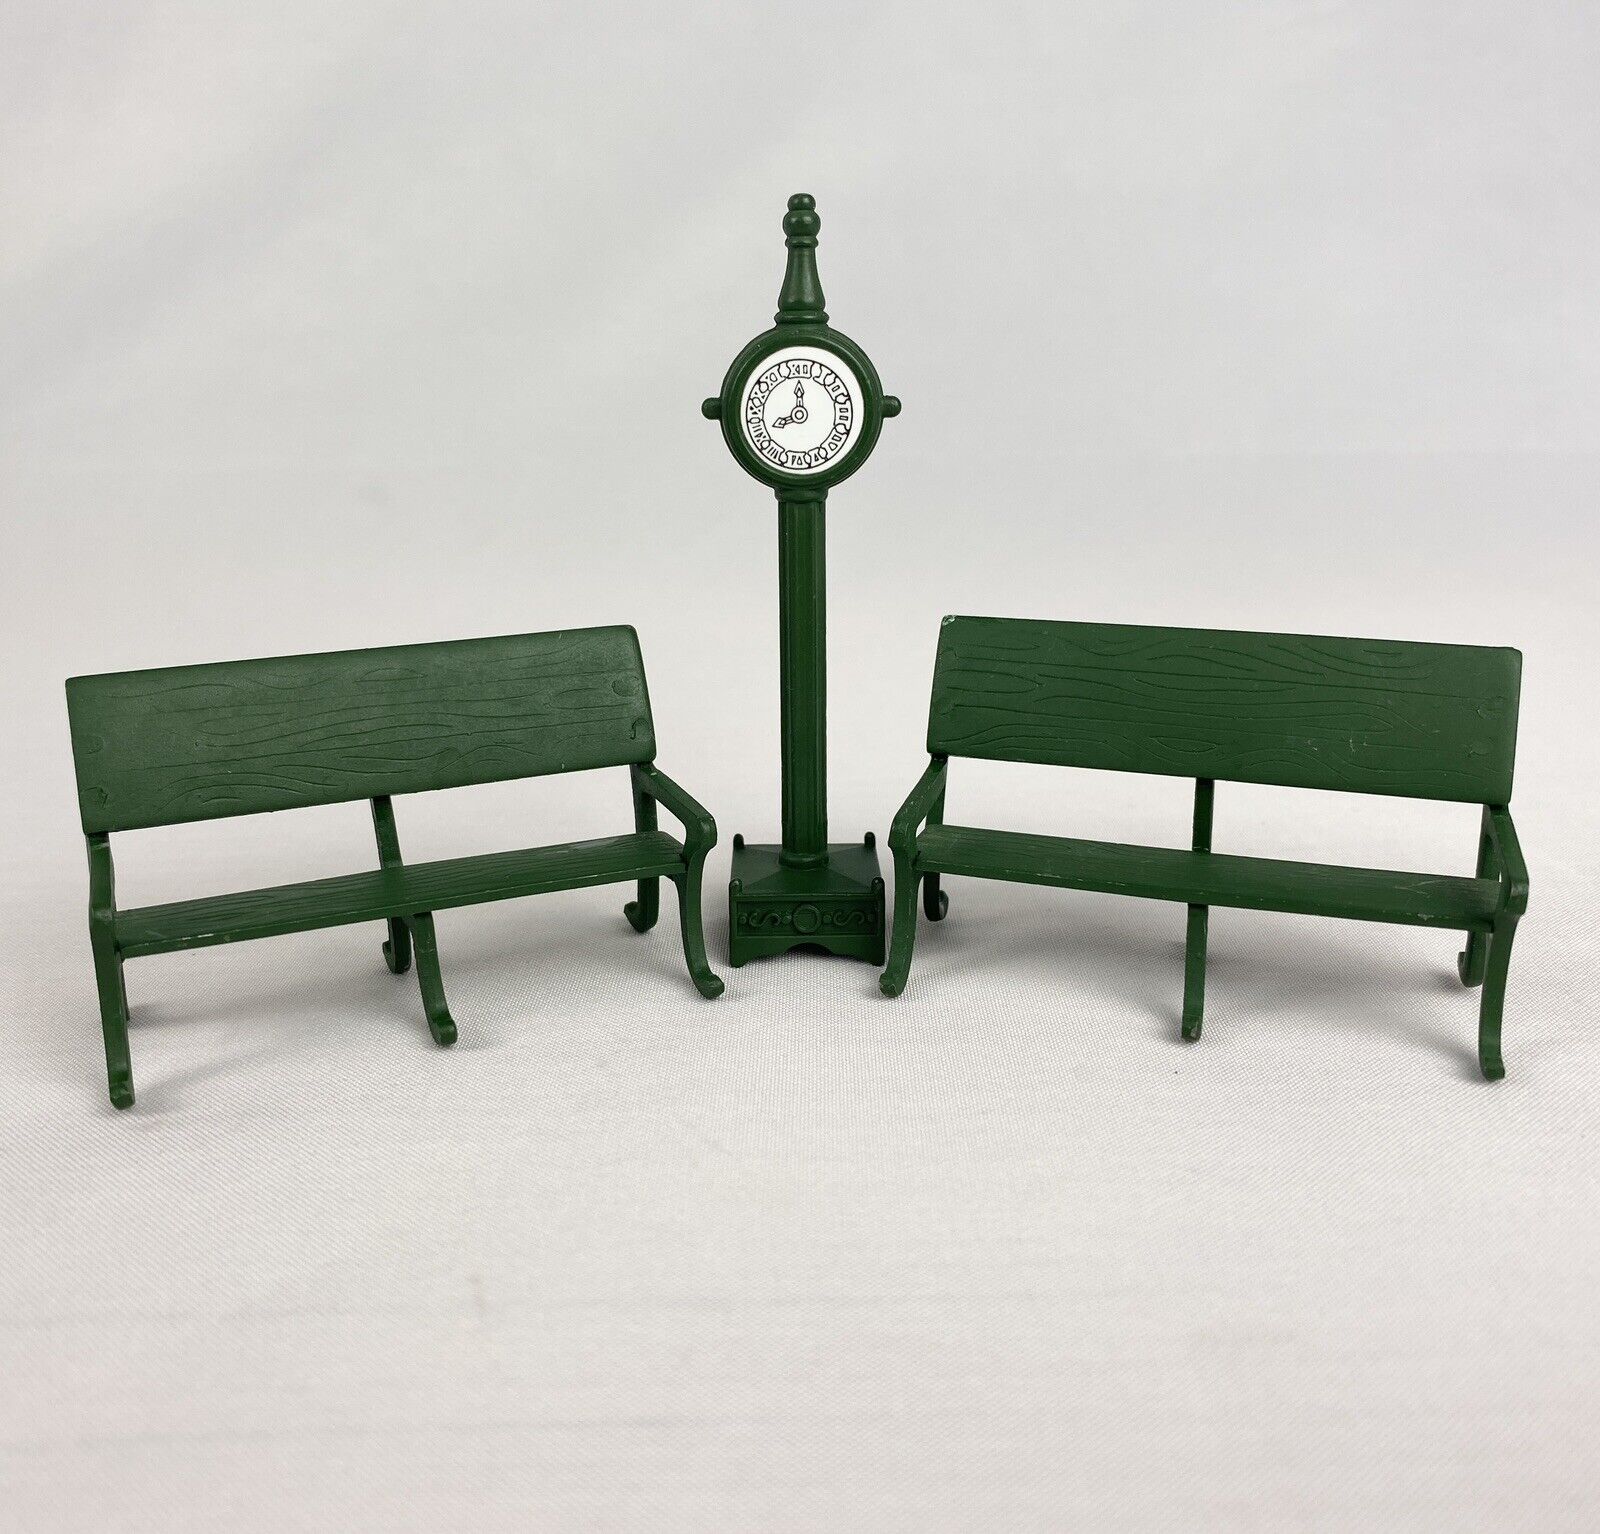 Department 56 Dickens Village Metal Park Benches And Town Clock Green Bench Set